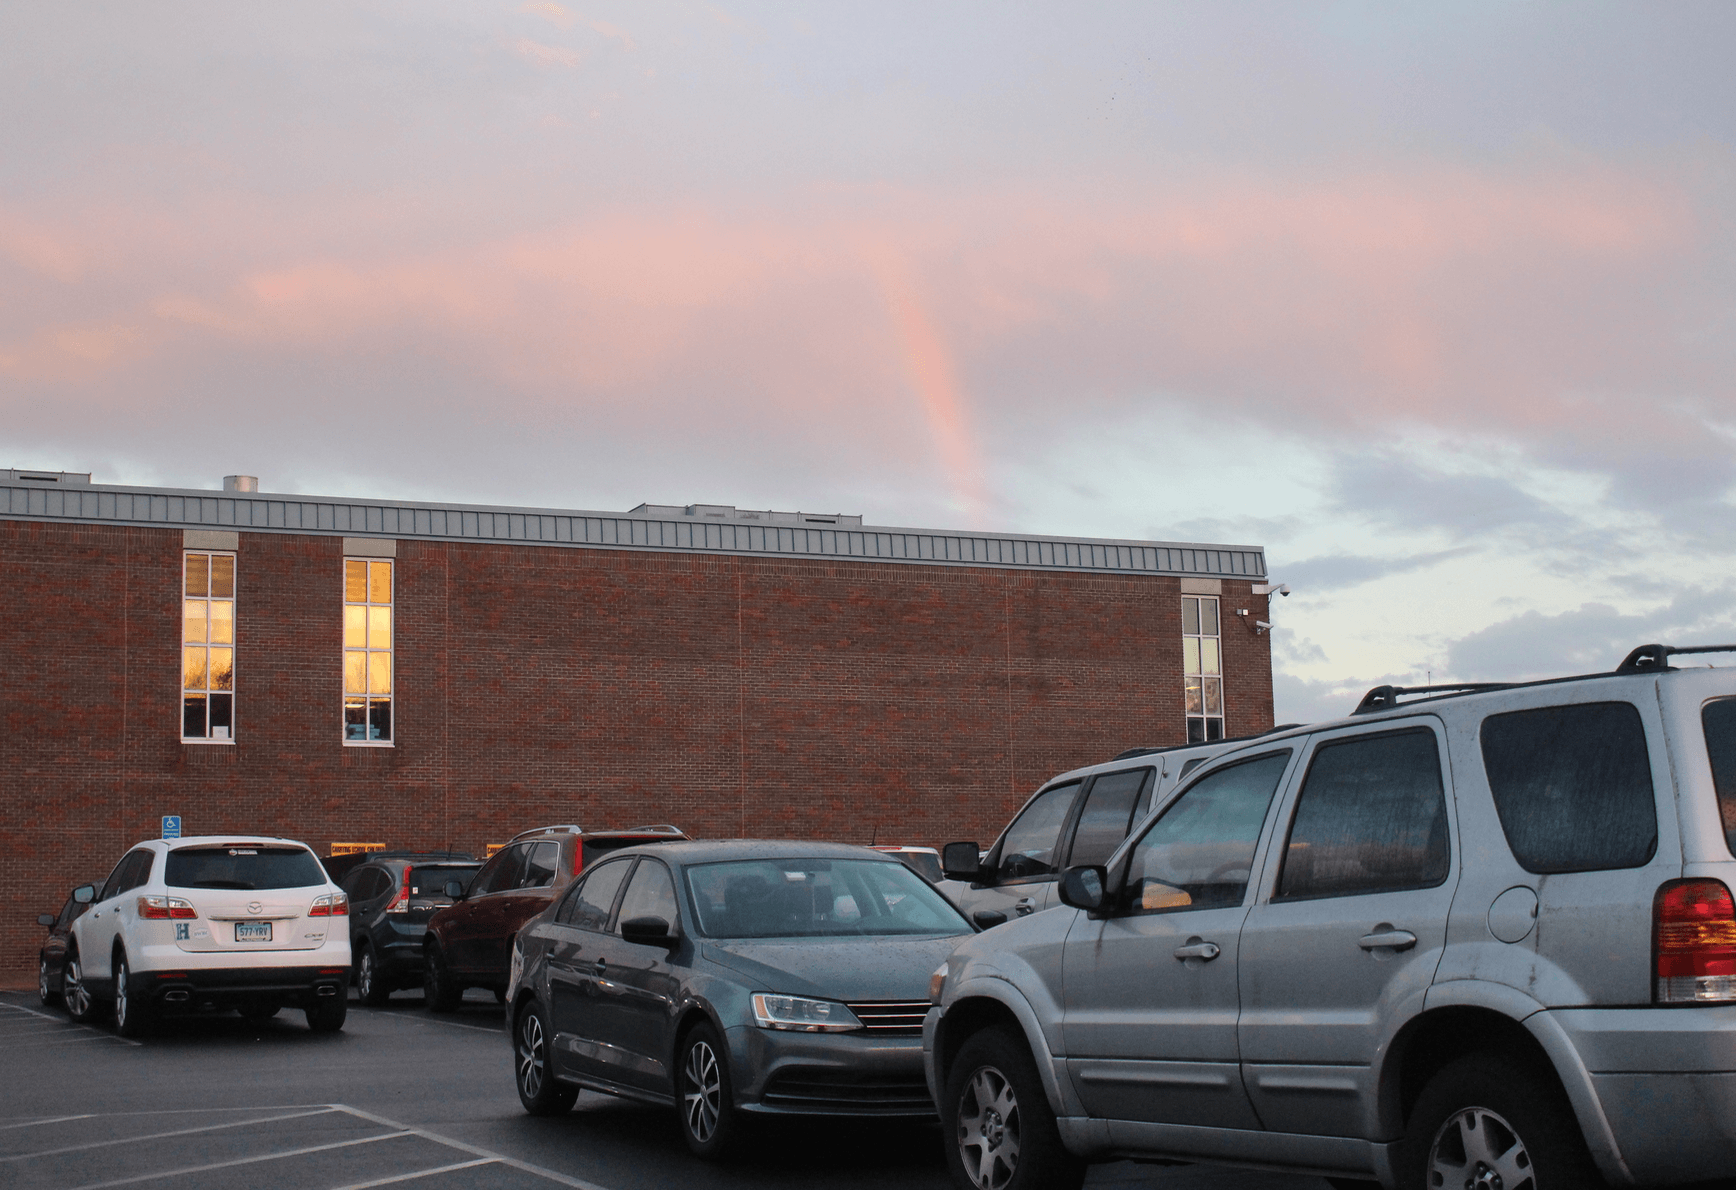 At GHS, there was a rainbow over the GHS swimming pool. Nov 6, 2017 Photo: Leslie Yager